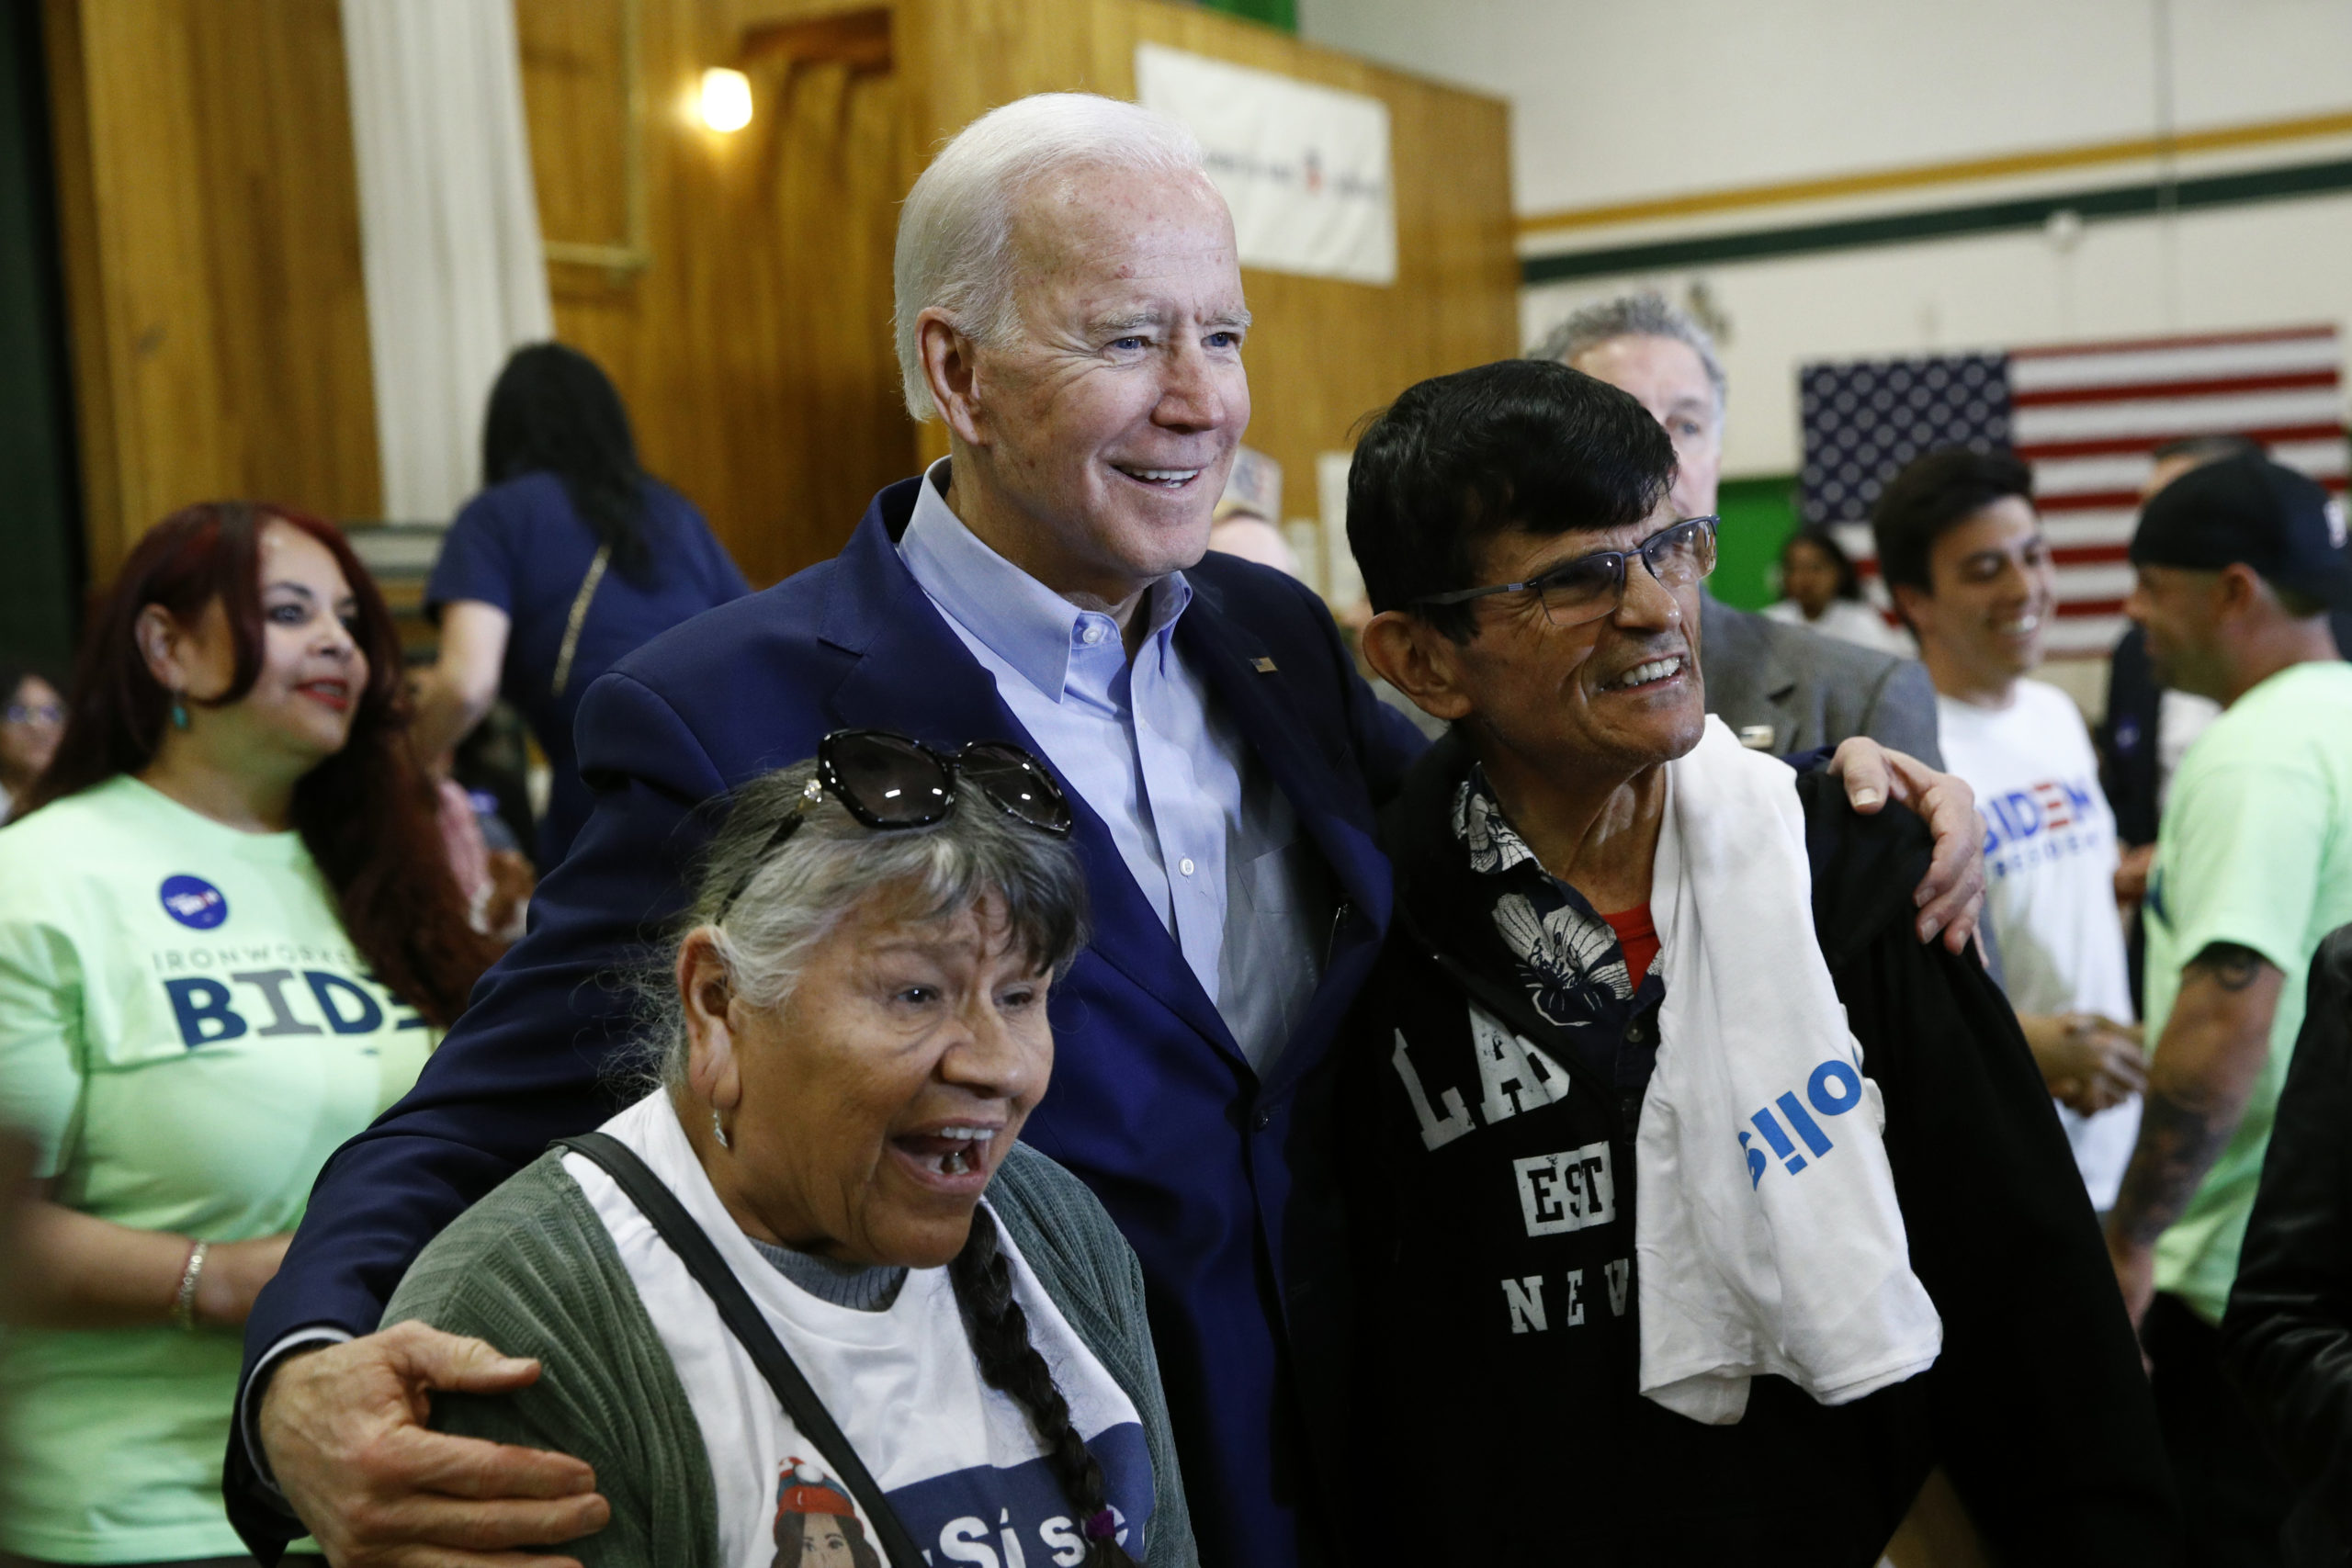 Democratic presidential candidate, former Vice President Joe Biden poses for a photo with attendees after speaking at a campaign event, Saturday, Feb. 15, 2020, at K.O. Knudson Middle School in Las Vegas. (AP Photo/Patrick Semansky)